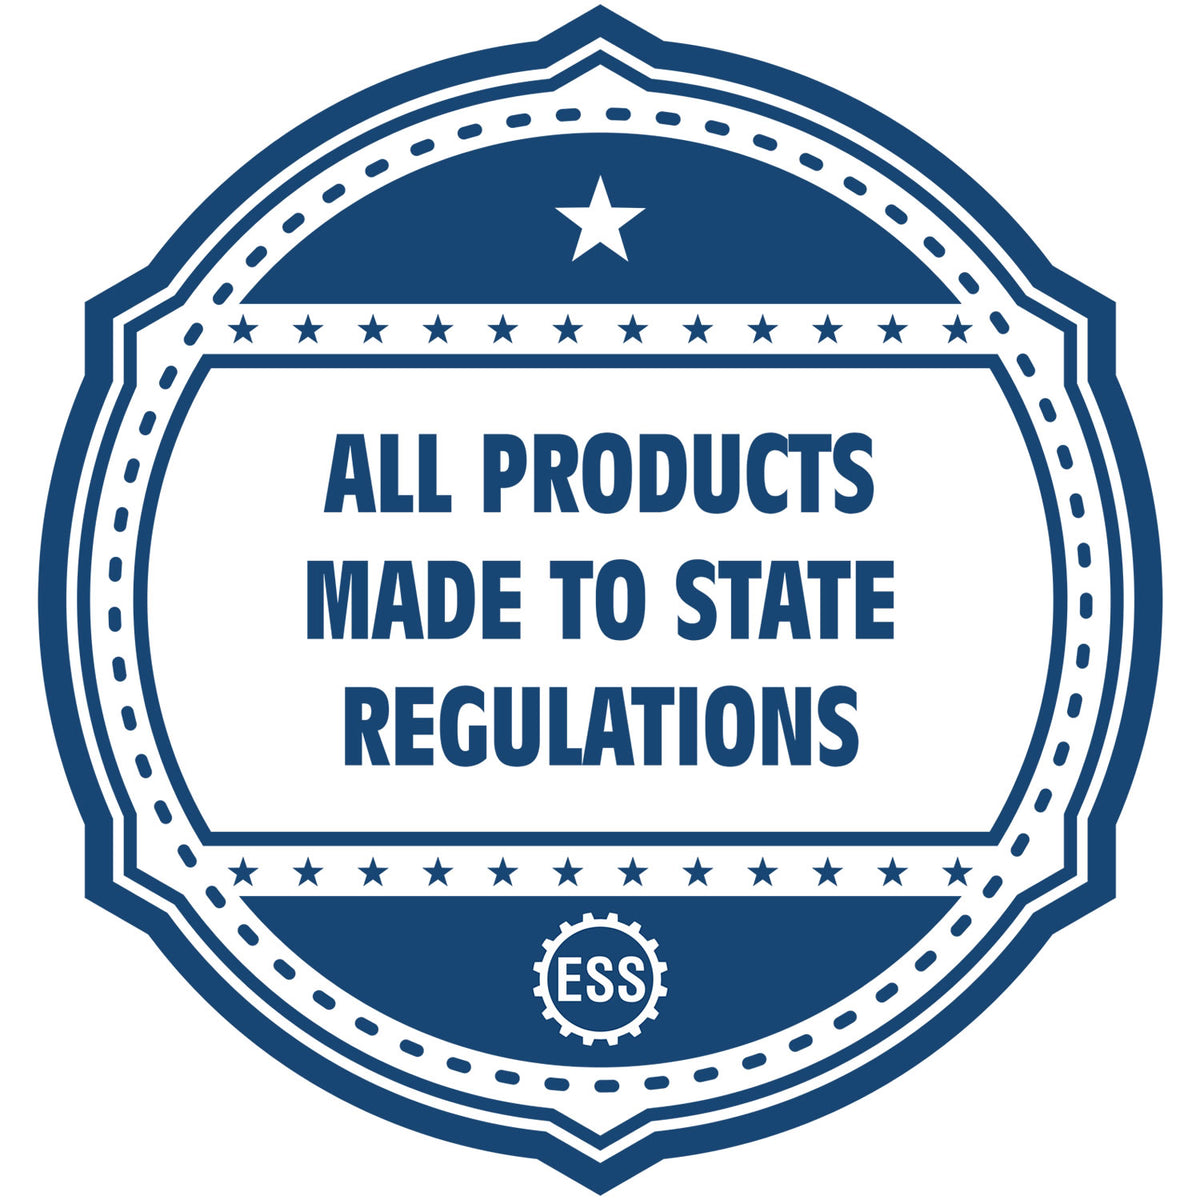 An icon or badge element for the Missouri Engineer Desk Seal showing that this product is made in compliance with state regulations.